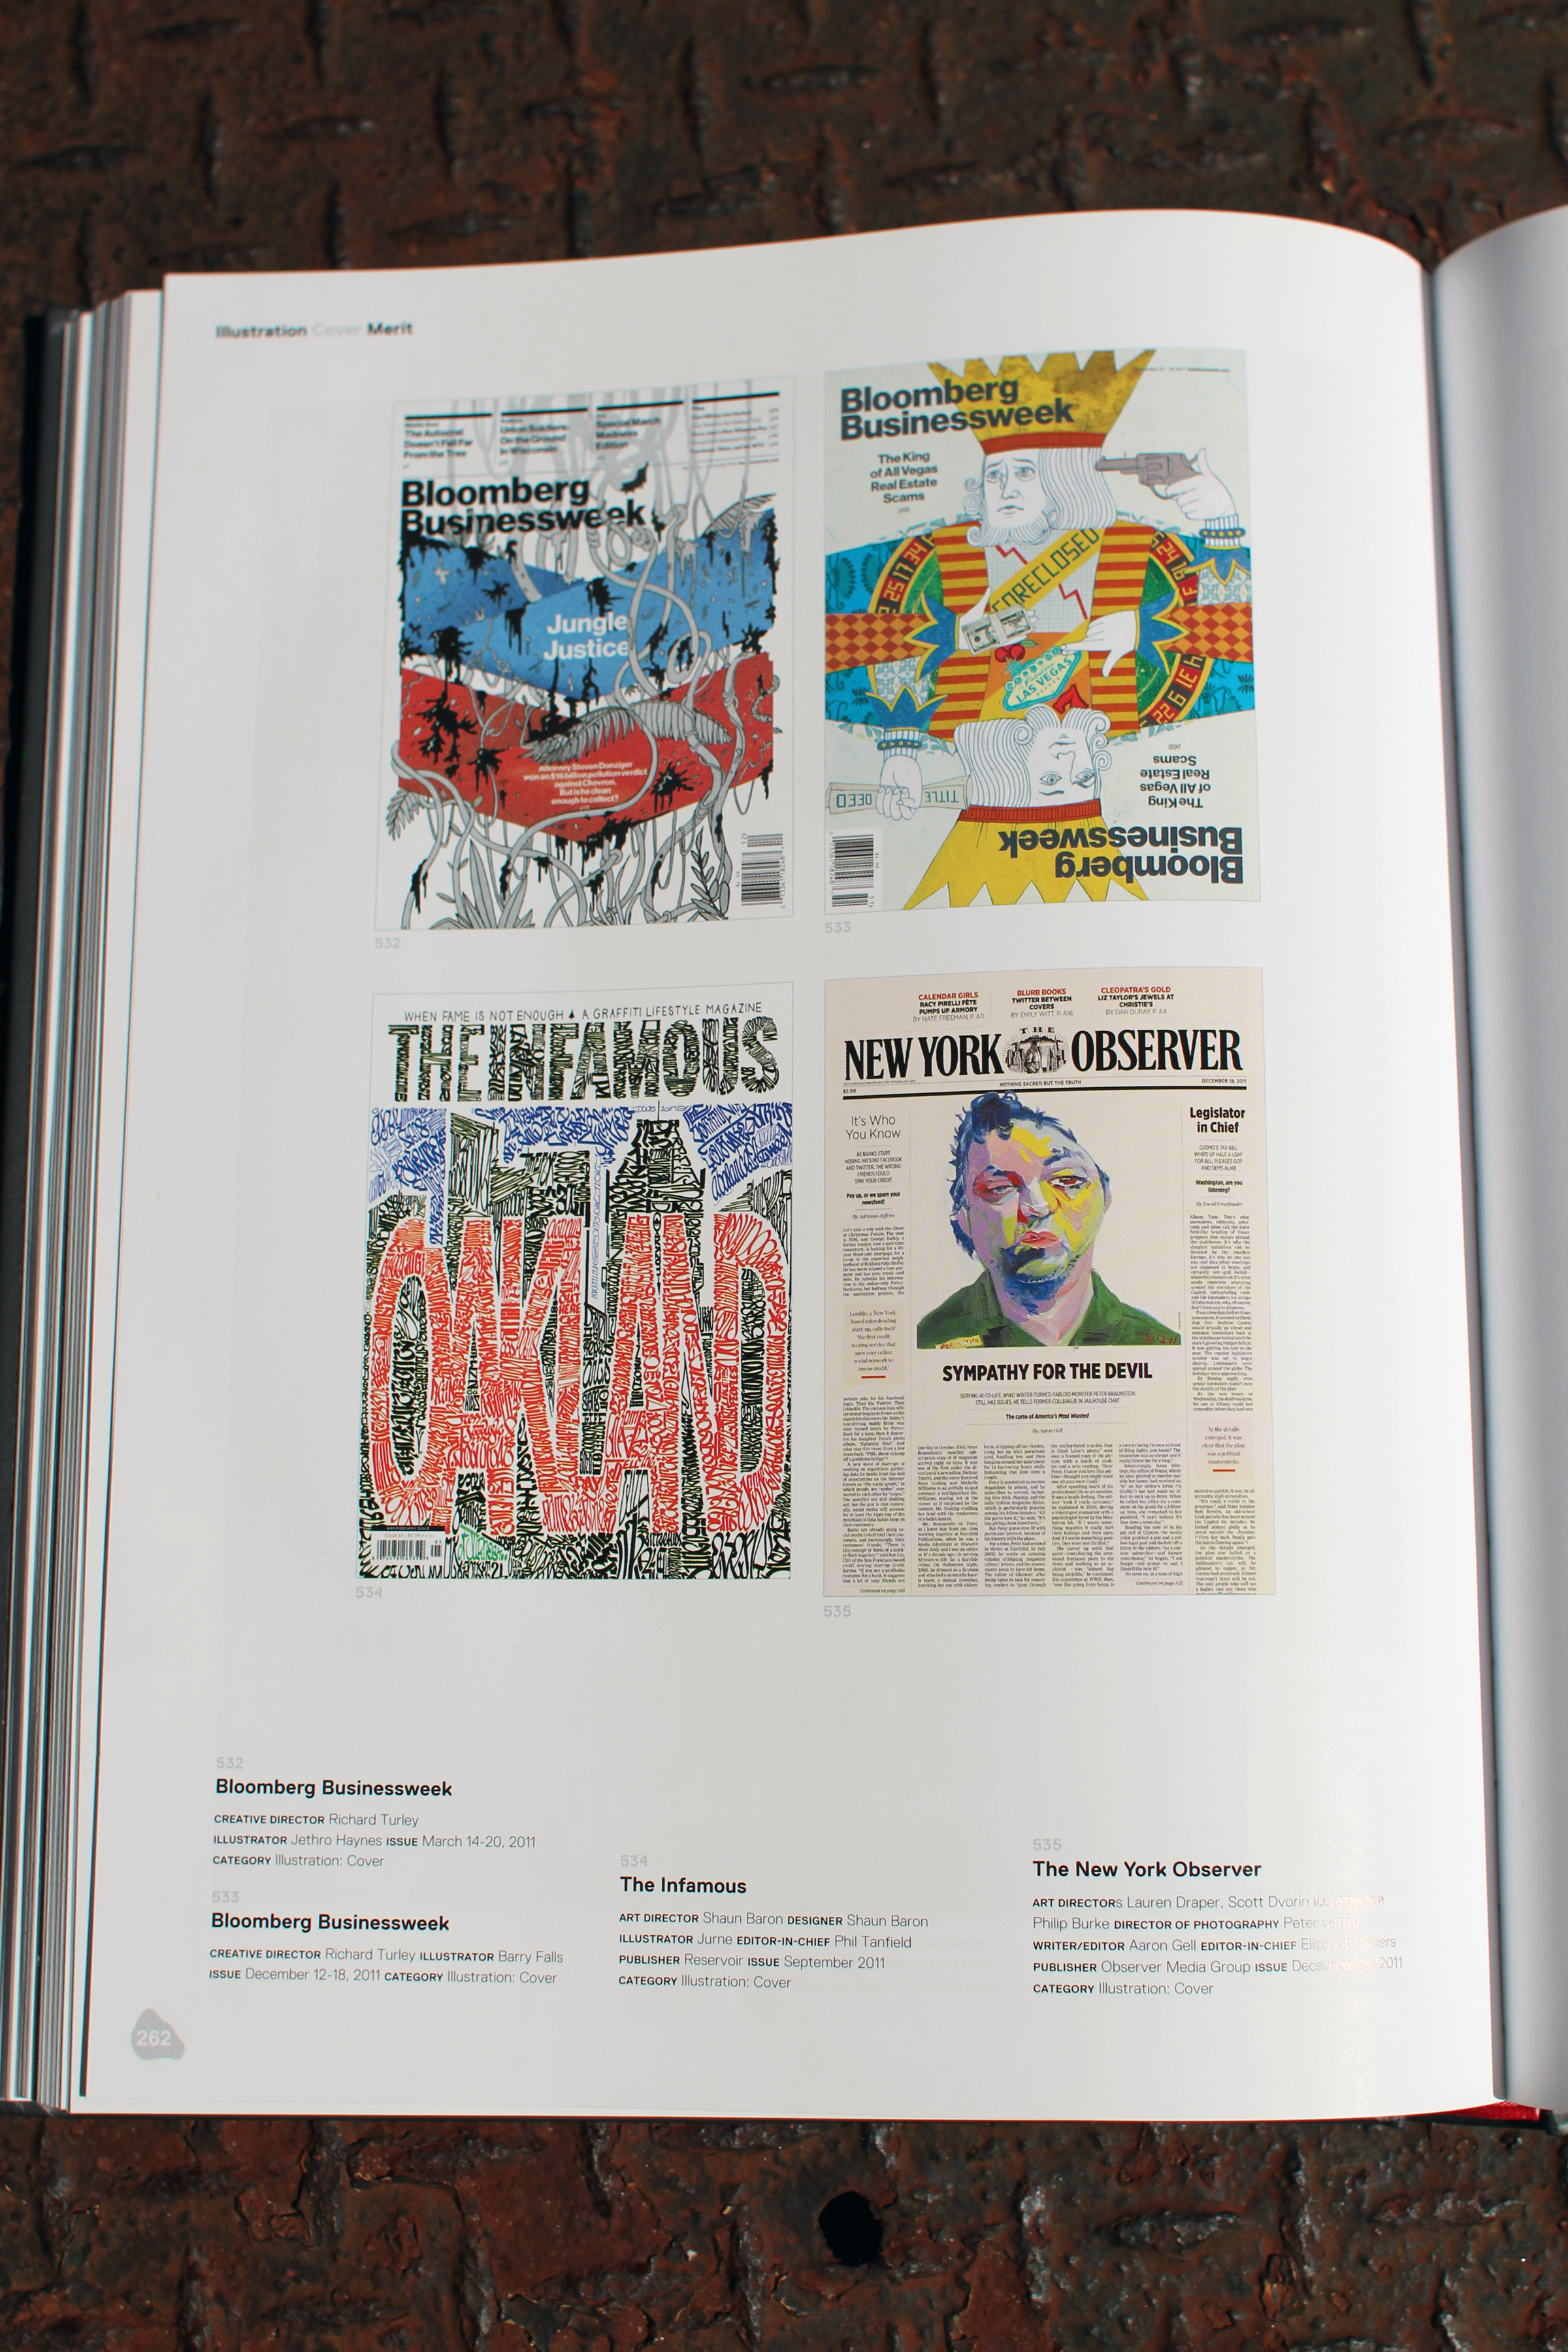 Photo of a layout from the Society of Publication Designer's 47th Annual, showcasing The Infamous magazine.